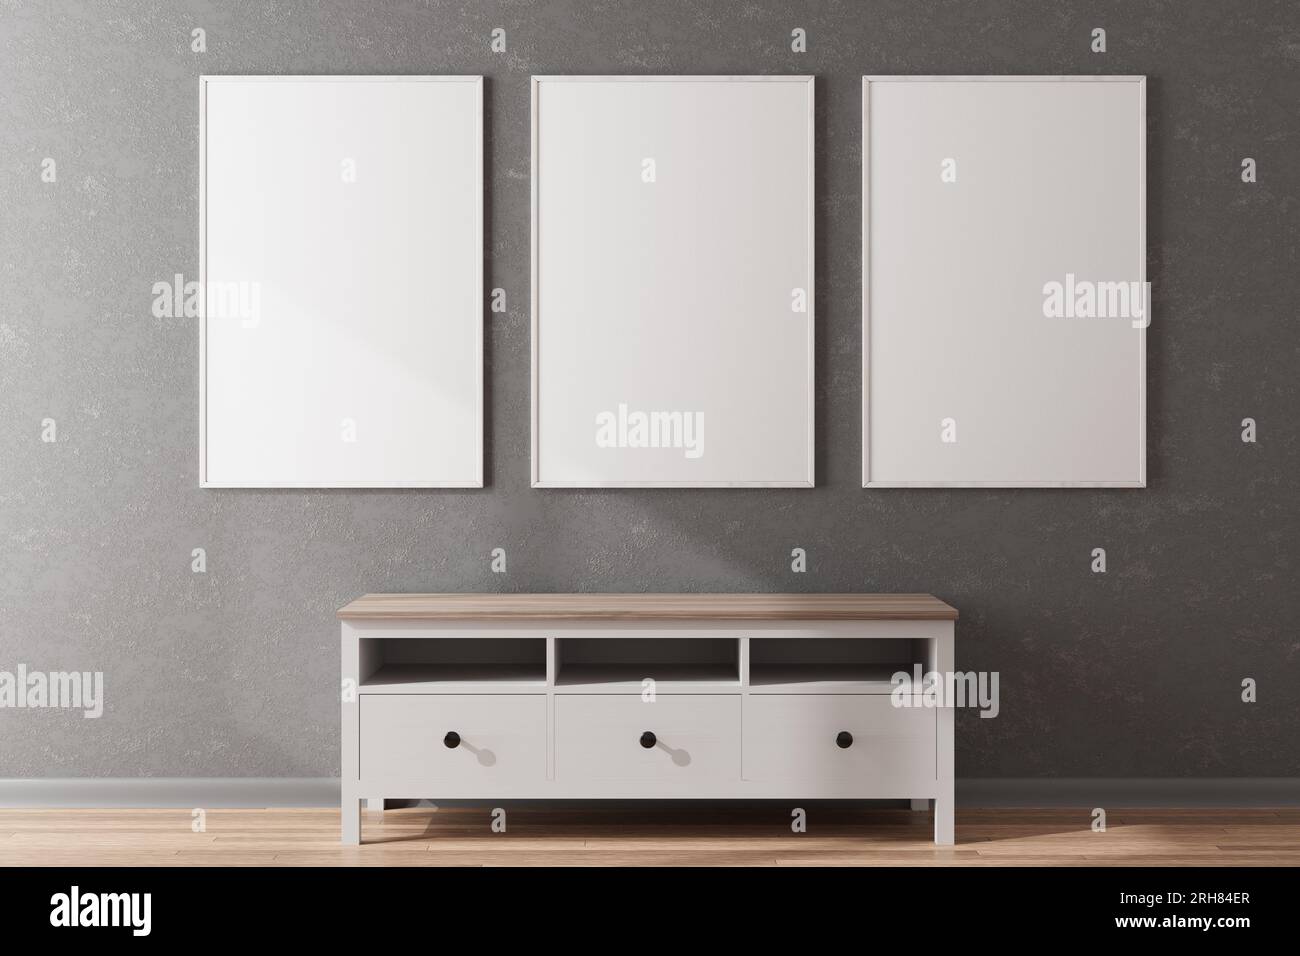 Mockup paintings, posters, photographs. Three empty wooden frames for a photo or picture on a white wall in a room with furniture. Design template for Stock Photo